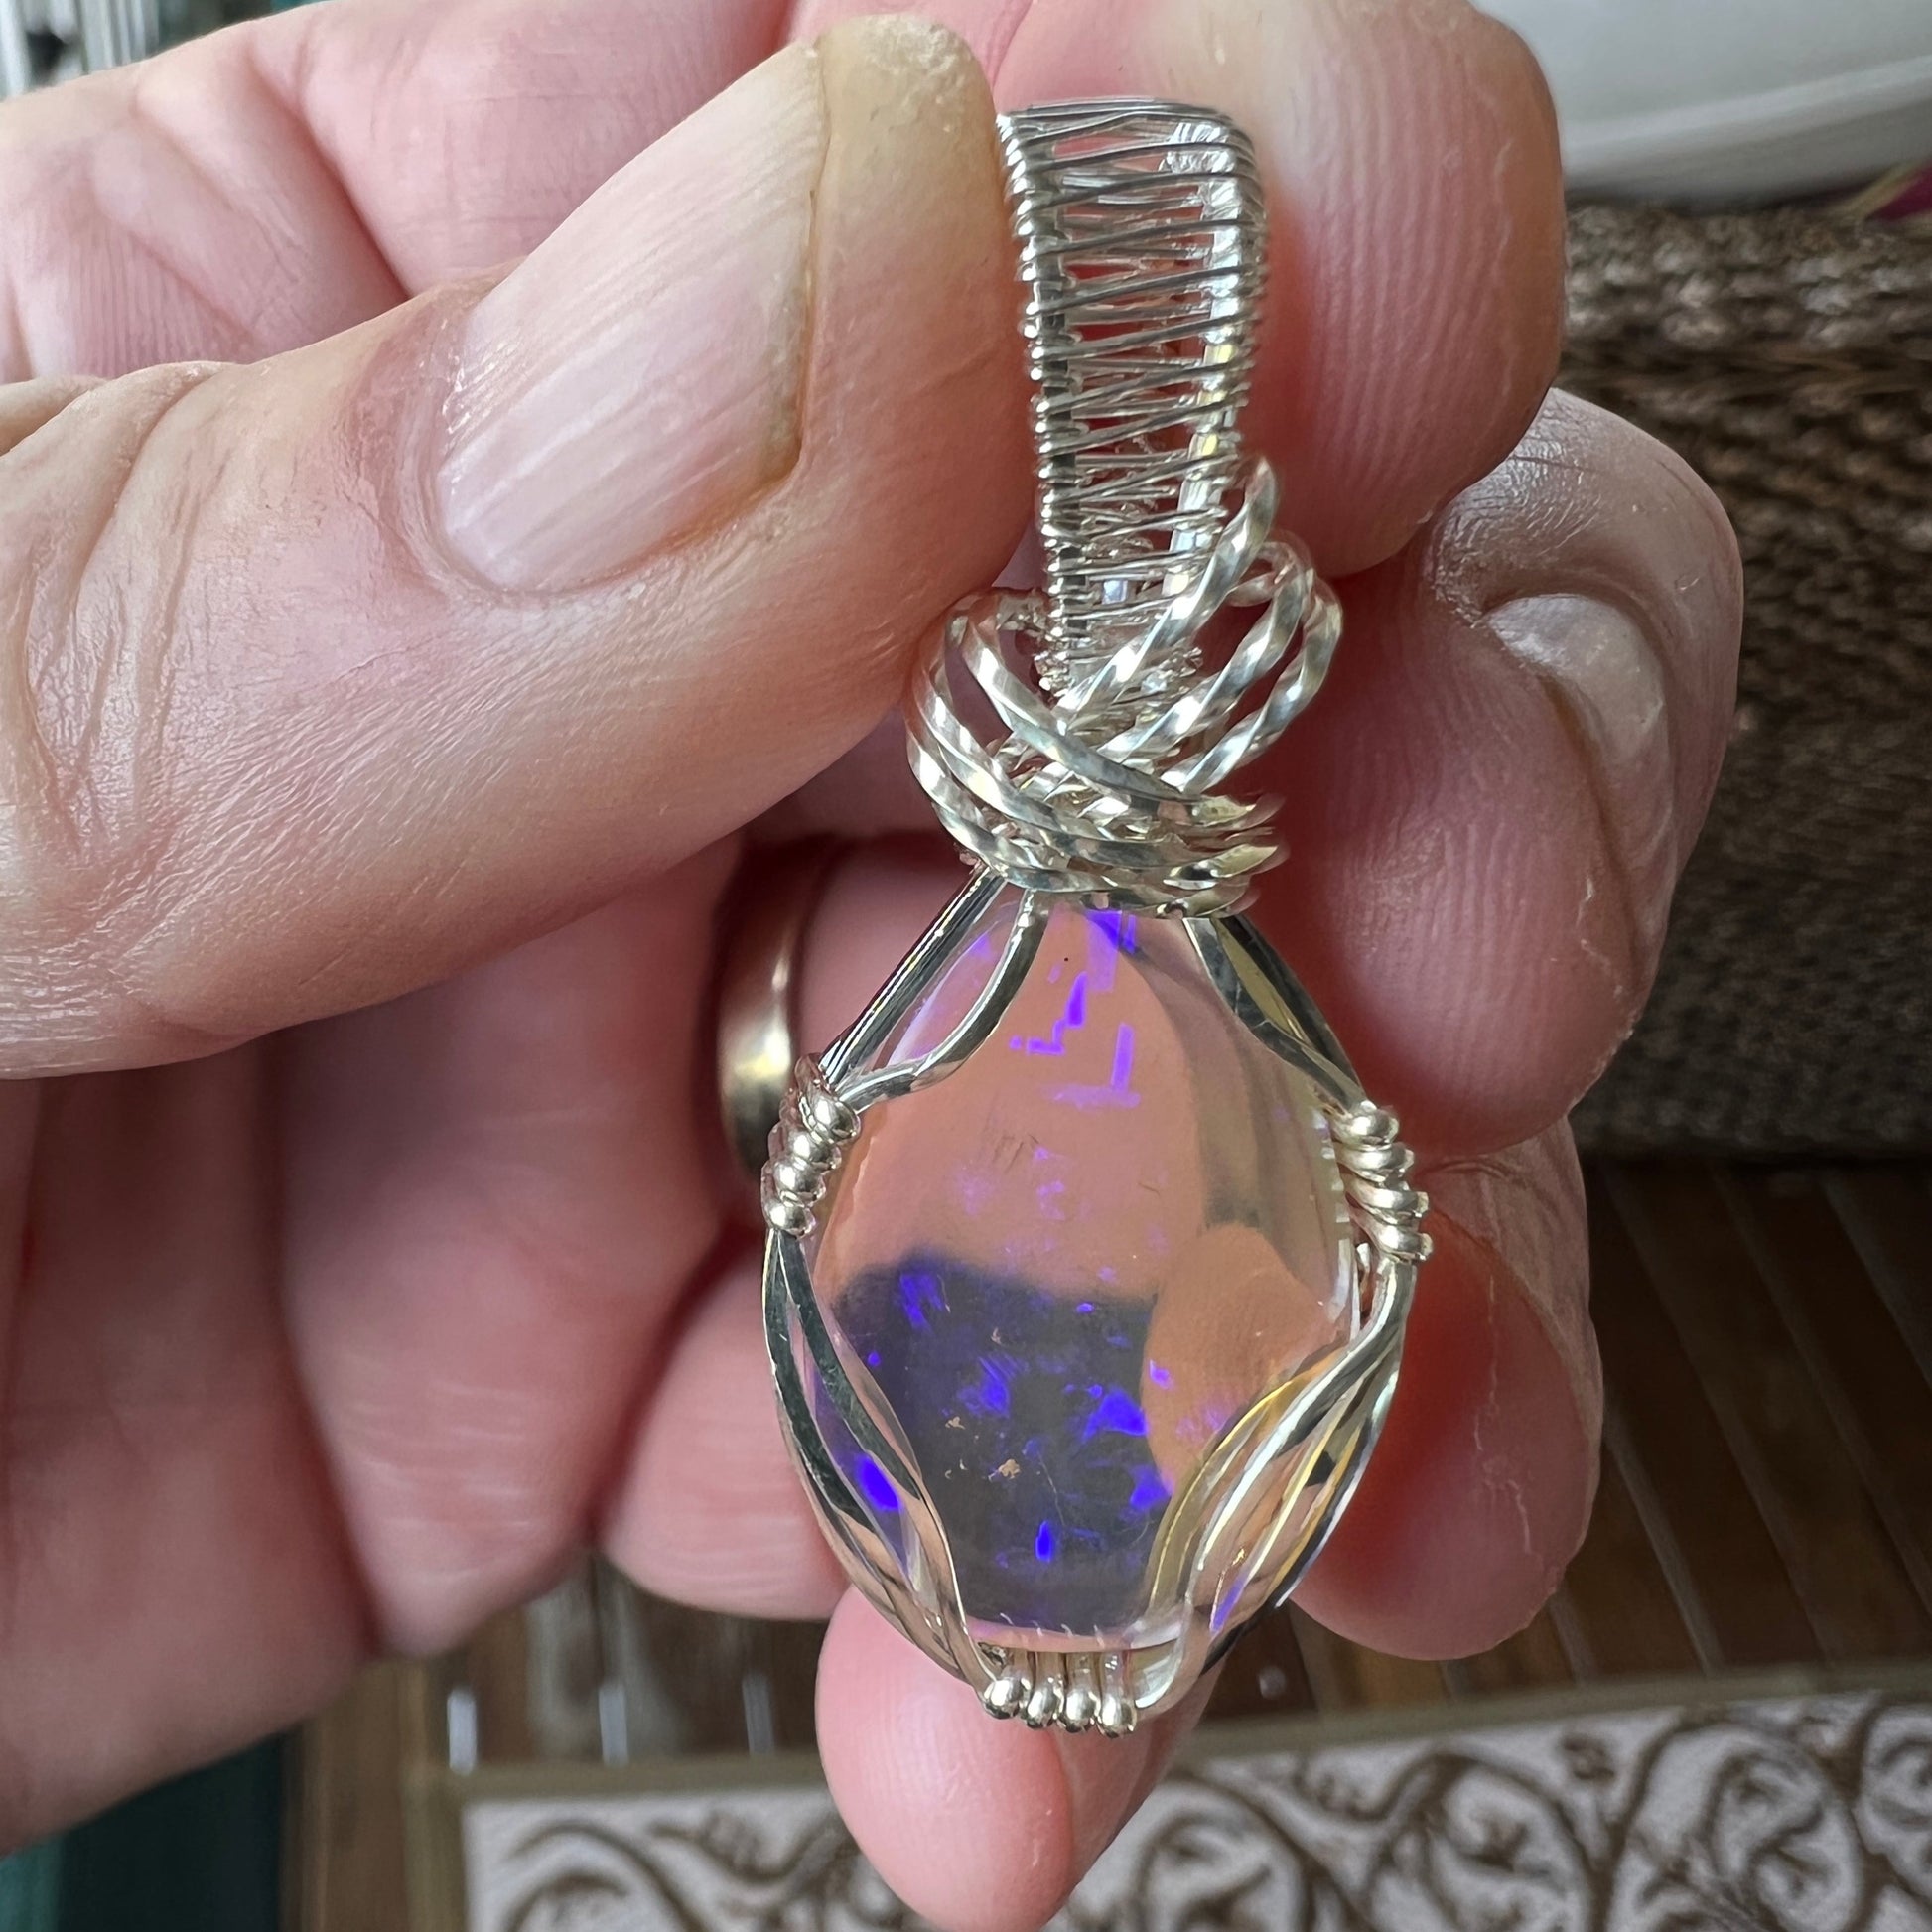 Beautifully cut Lightning Ridge Jelly Crystal opal. Cut and expertly polished by Bill Johnson and set in a unique silver wire wrap. An awesome hand made gift. 